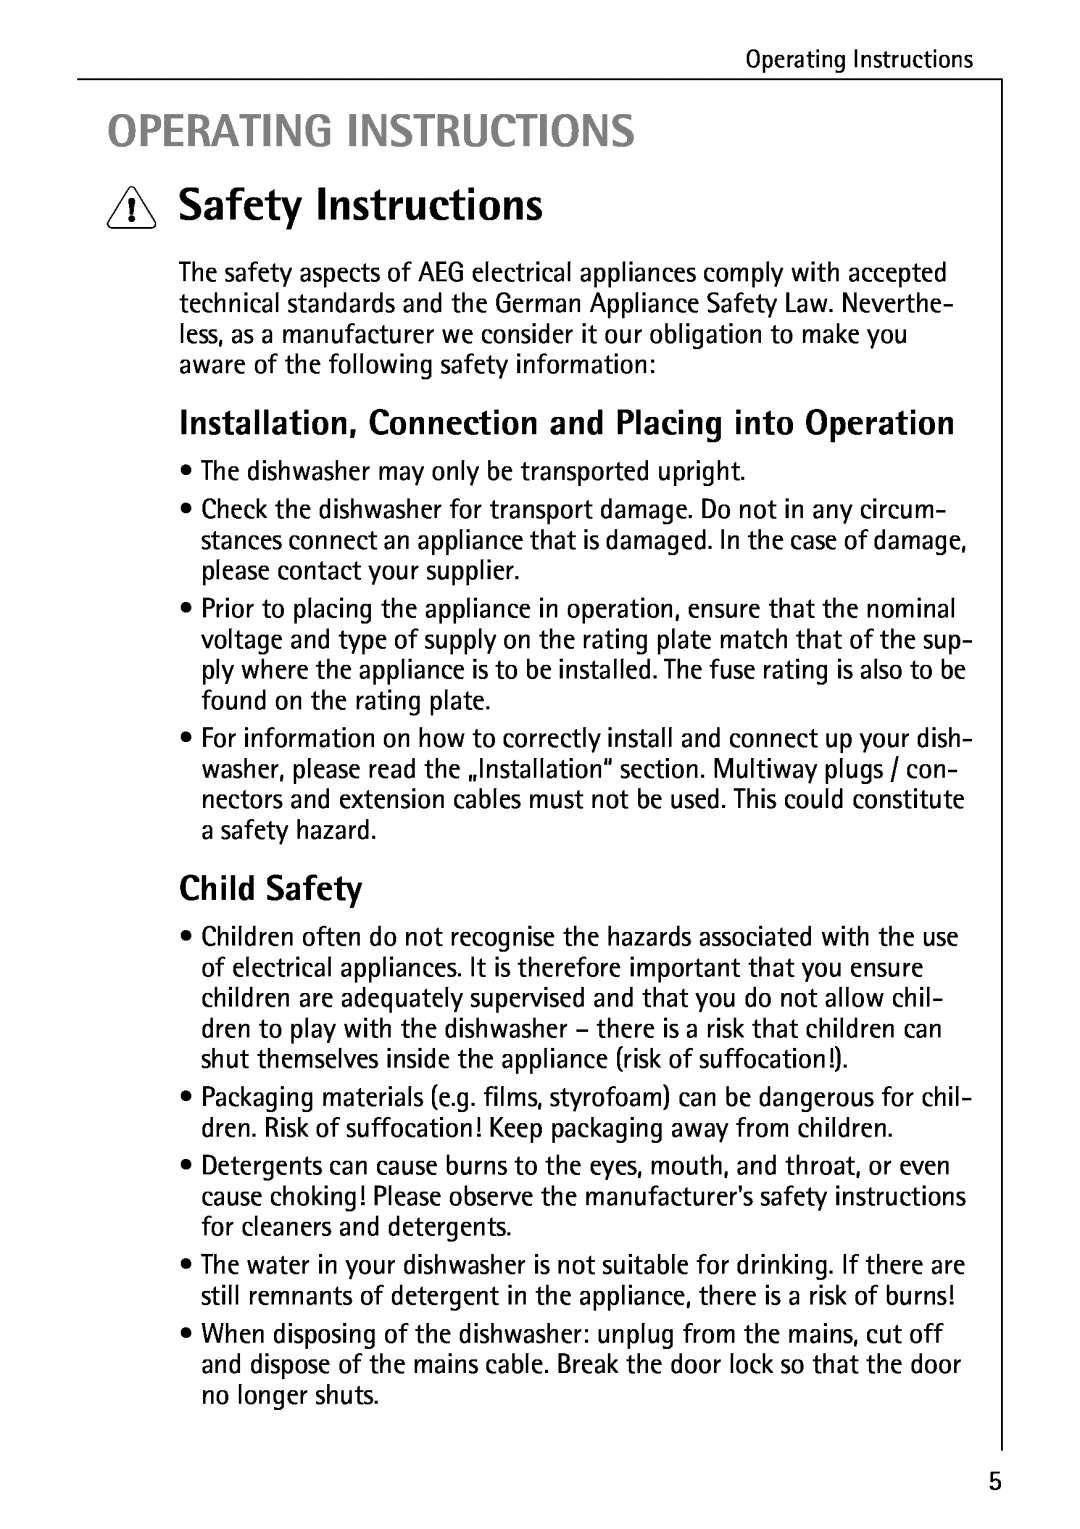 AEG 40260 I Operating Instructions, Safety Instructions, Installation, Connection and Placing into Operation, Child Safety 